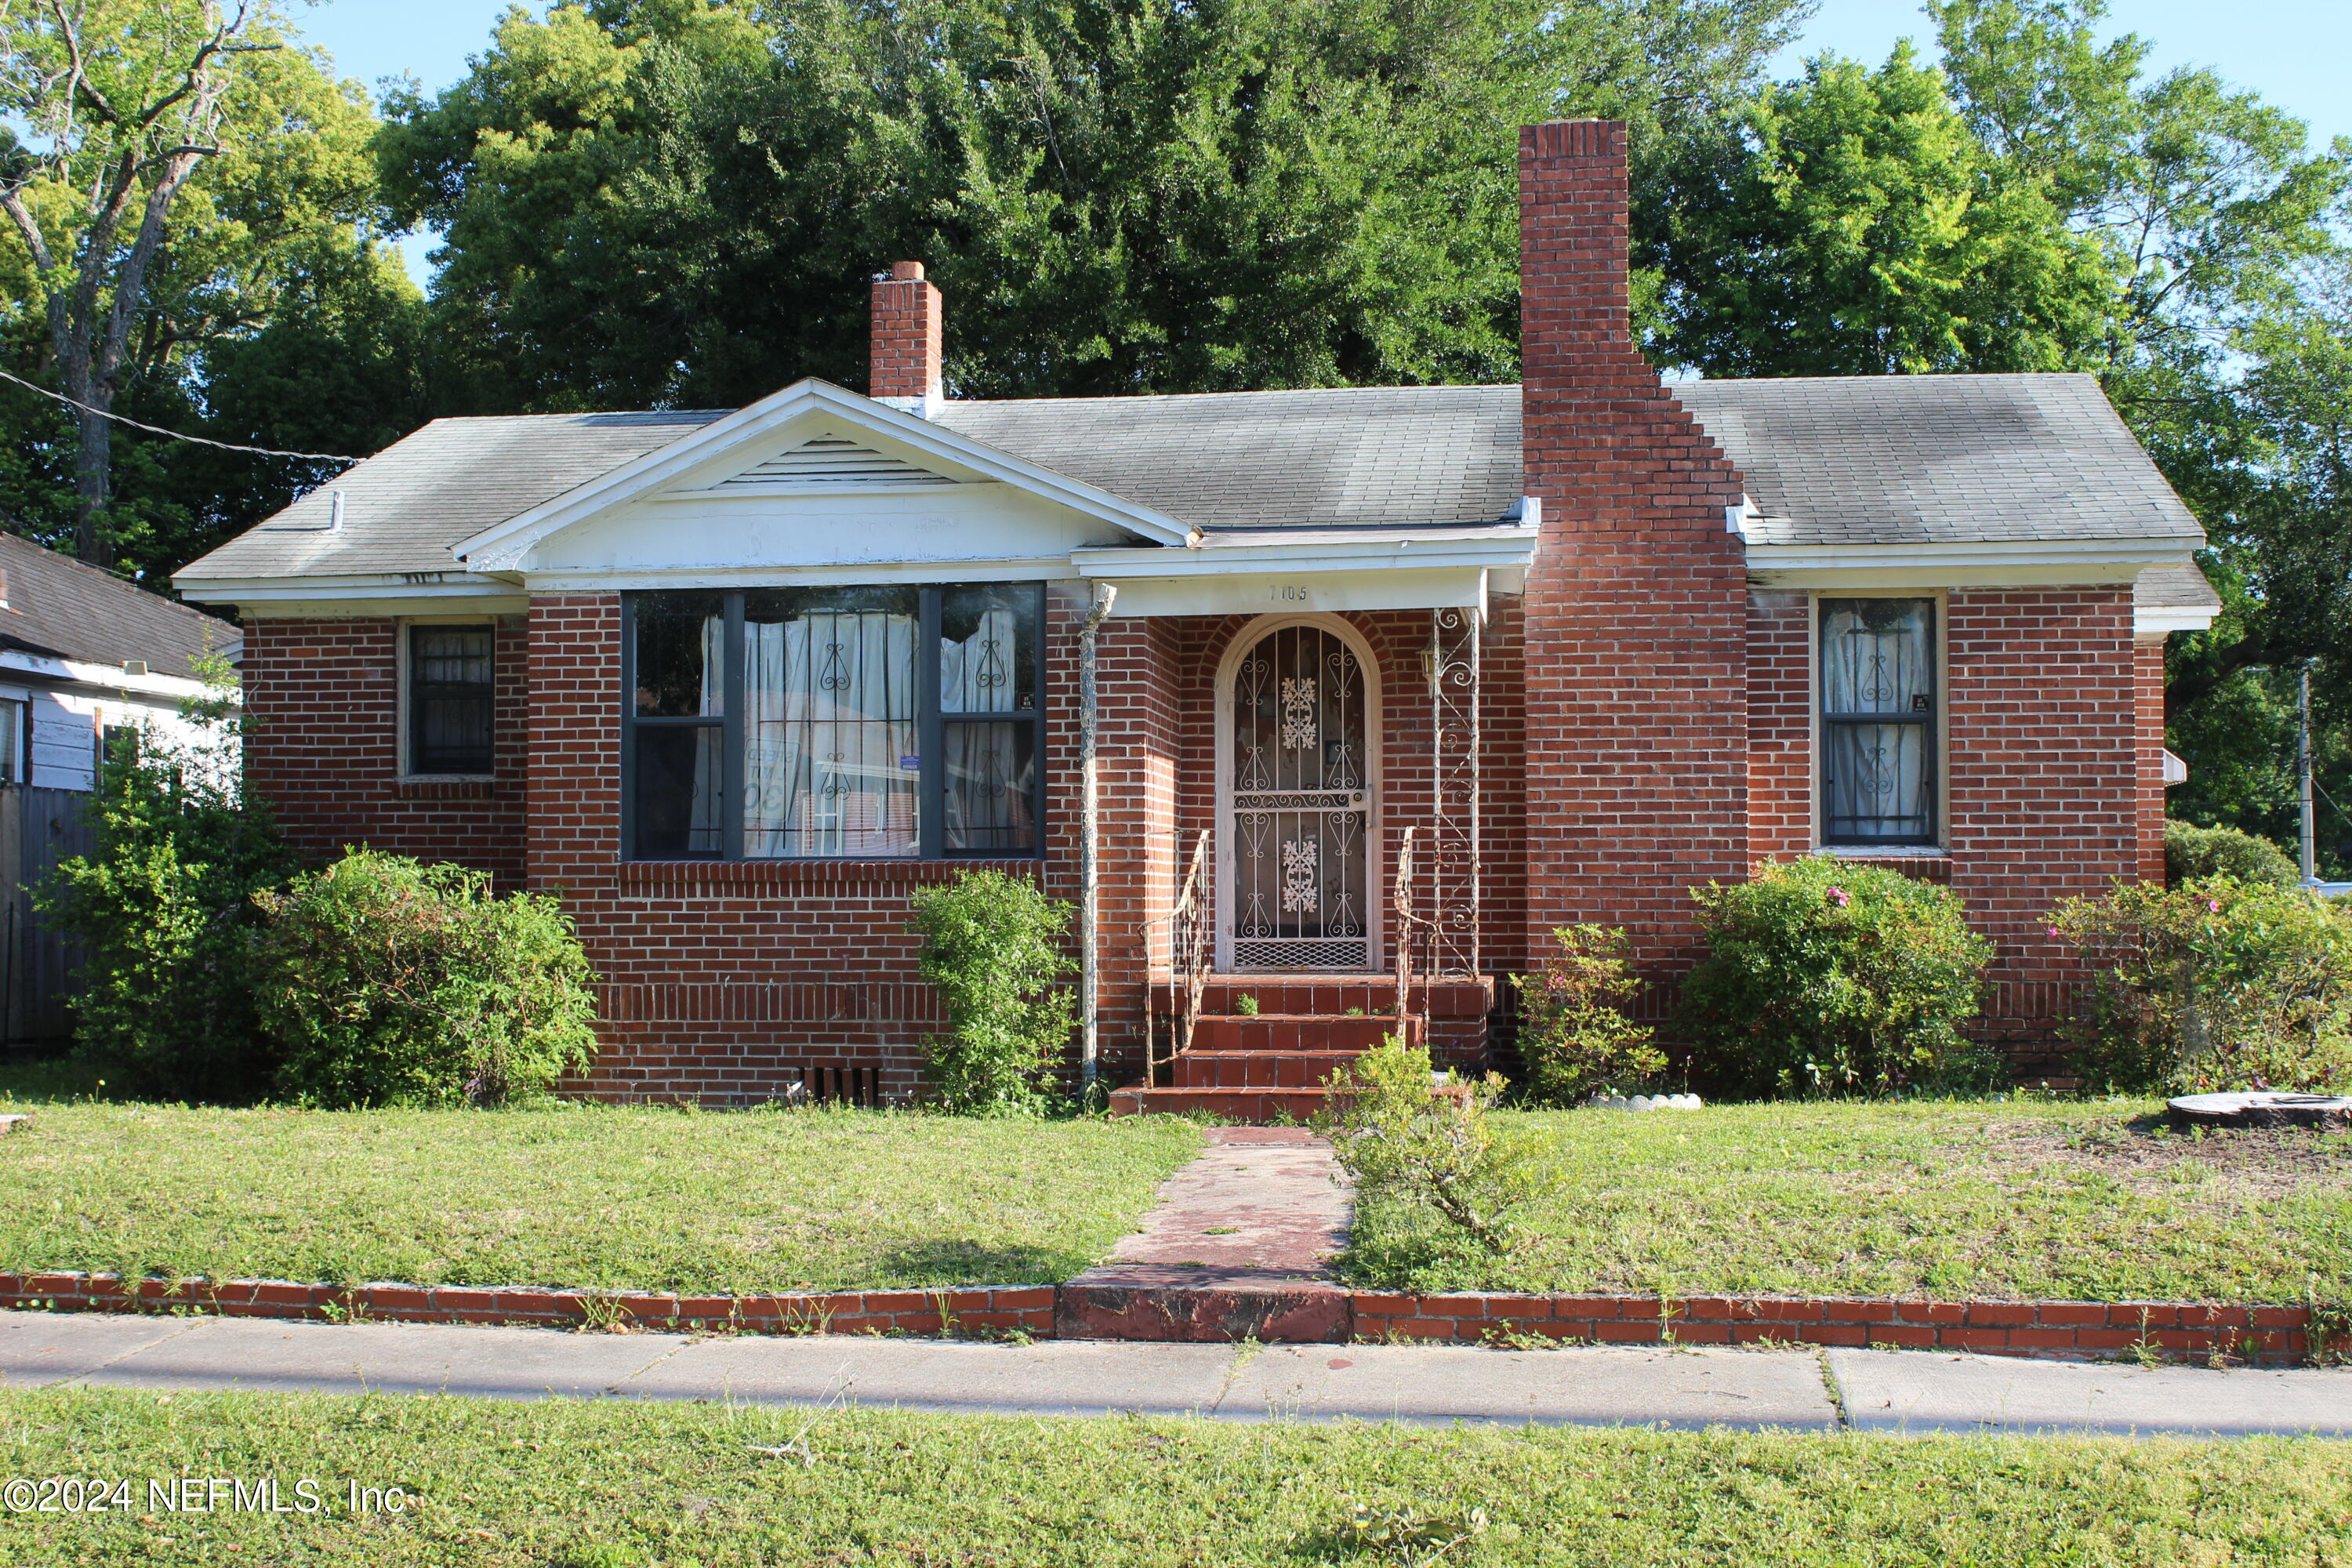 Jacksonville, FL home for sale located at 1105 W 12th Street, Jacksonville, FL 32209